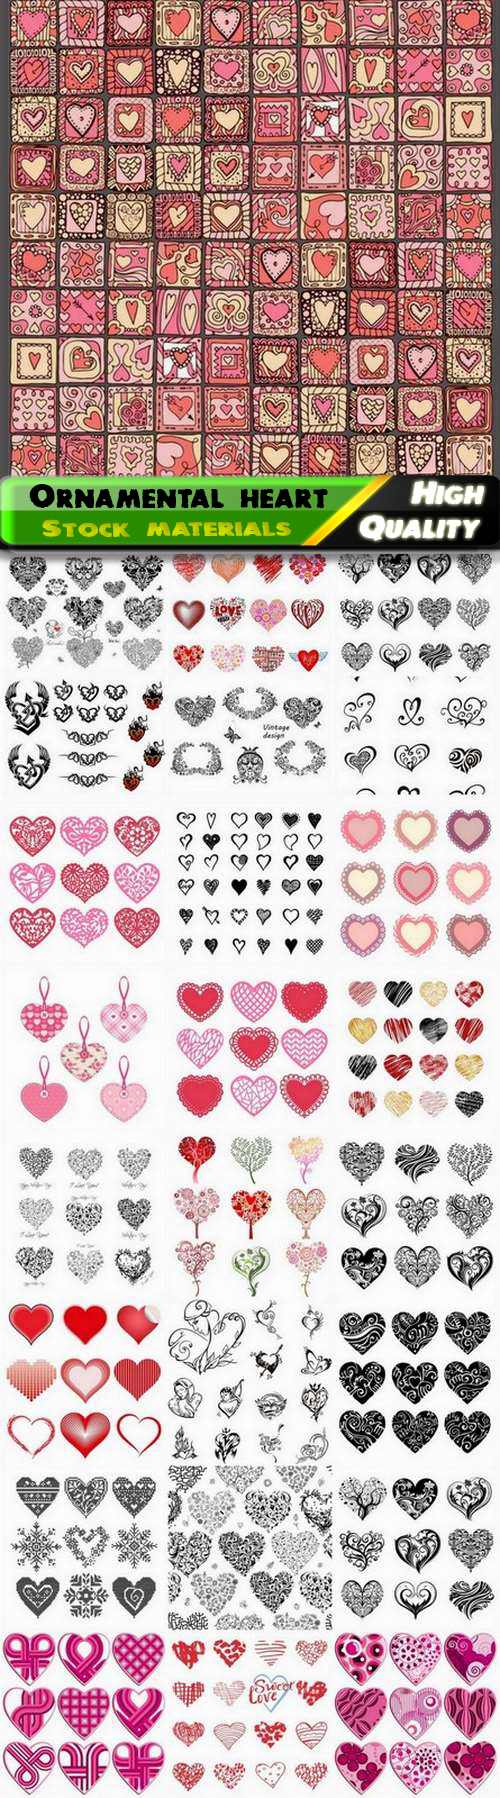 Ornamental heart of couples in love for Valentine day card - 25 Eps